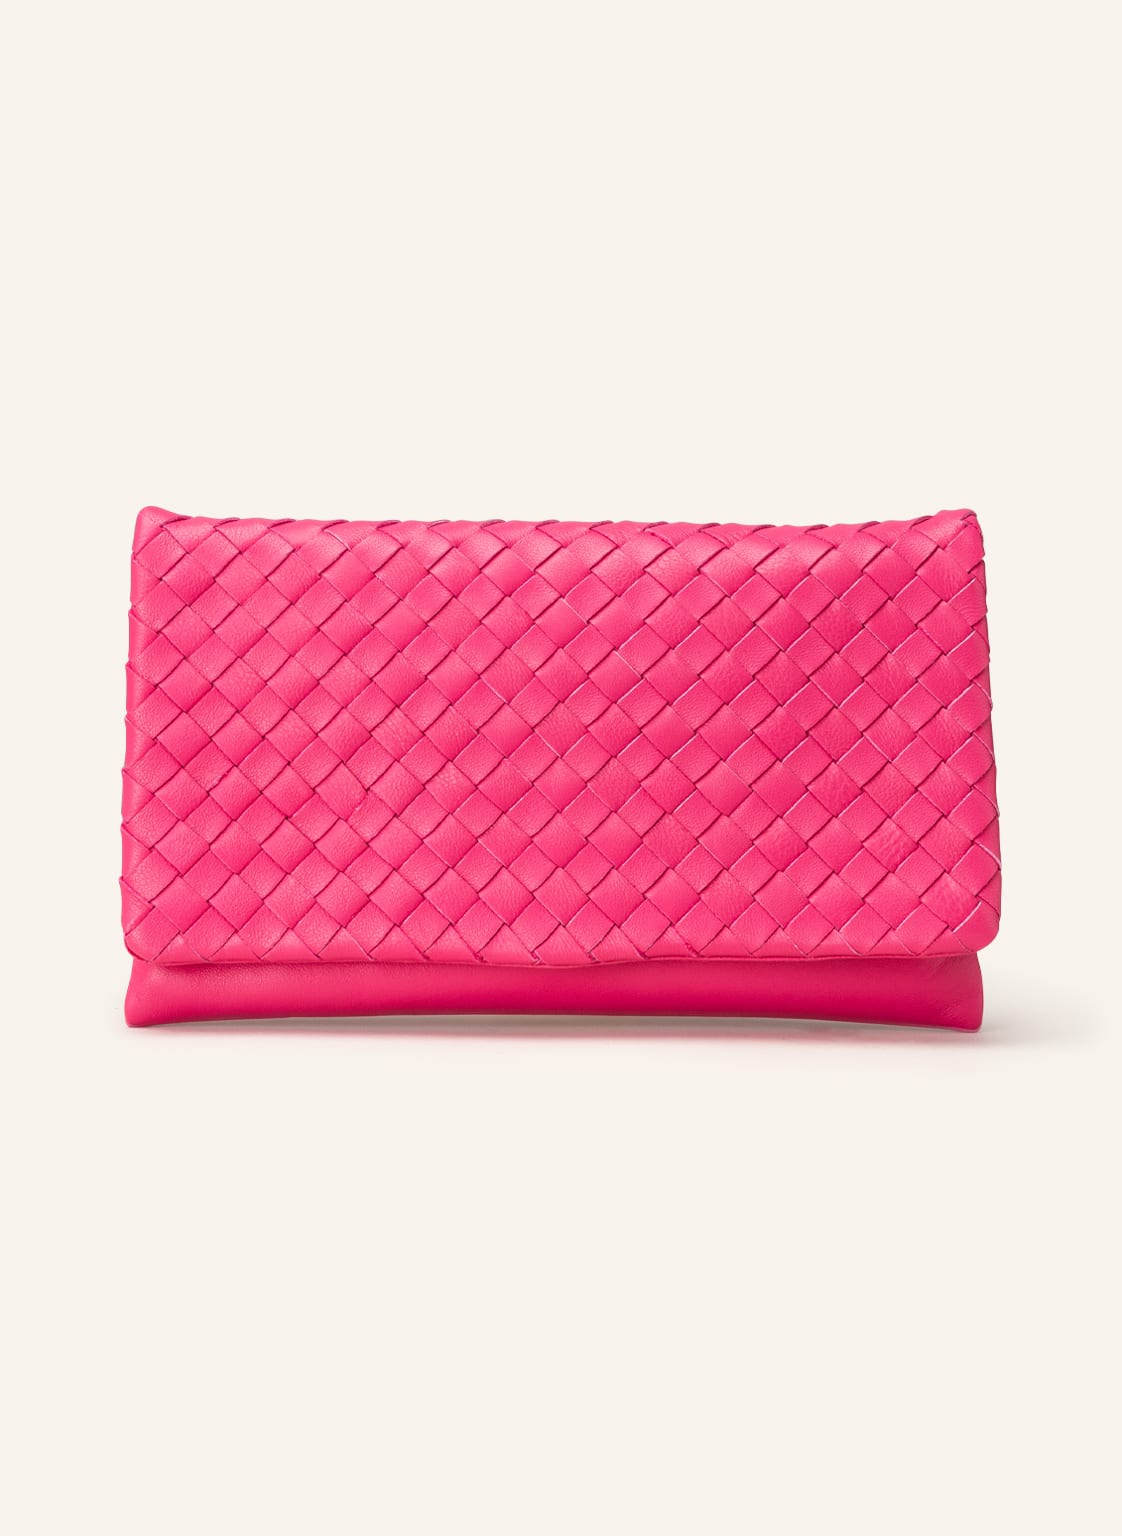 Image of Abro Clutch pink